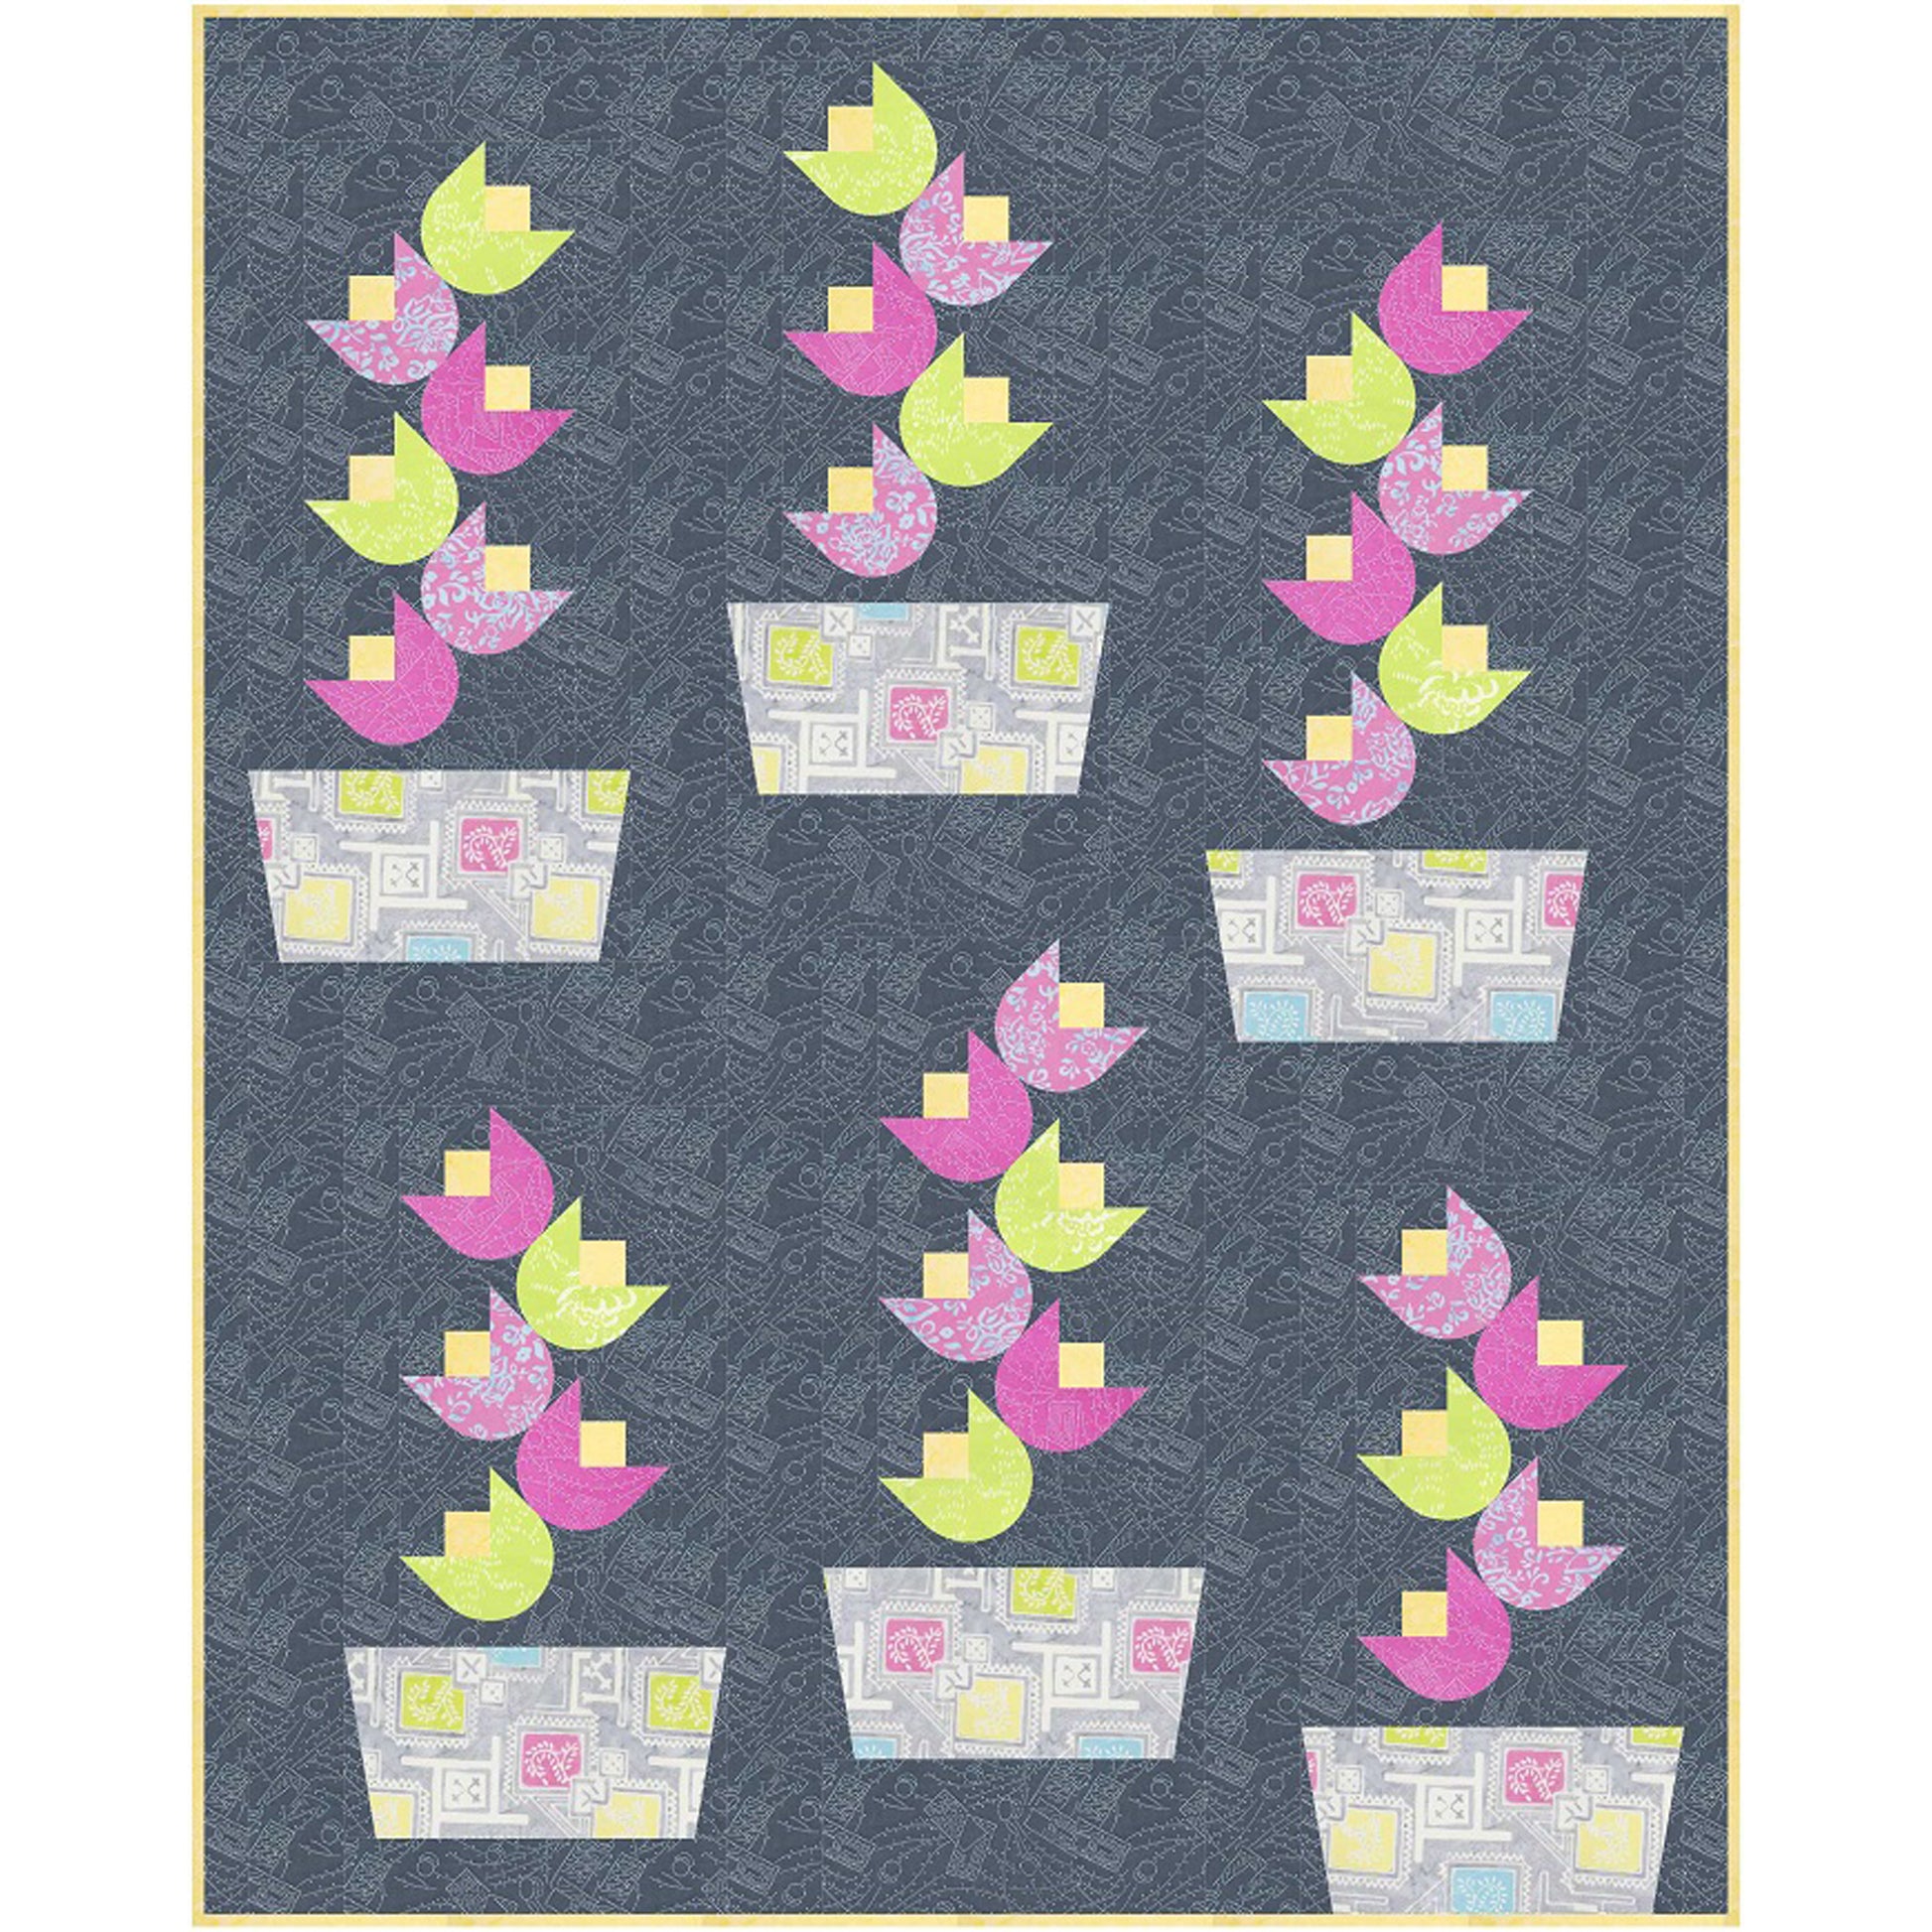 A quilt hanging of pink, yellow and green flowers in a fun gray, pink, yellow, and green pot designed fabric and a gray designed fabric background.